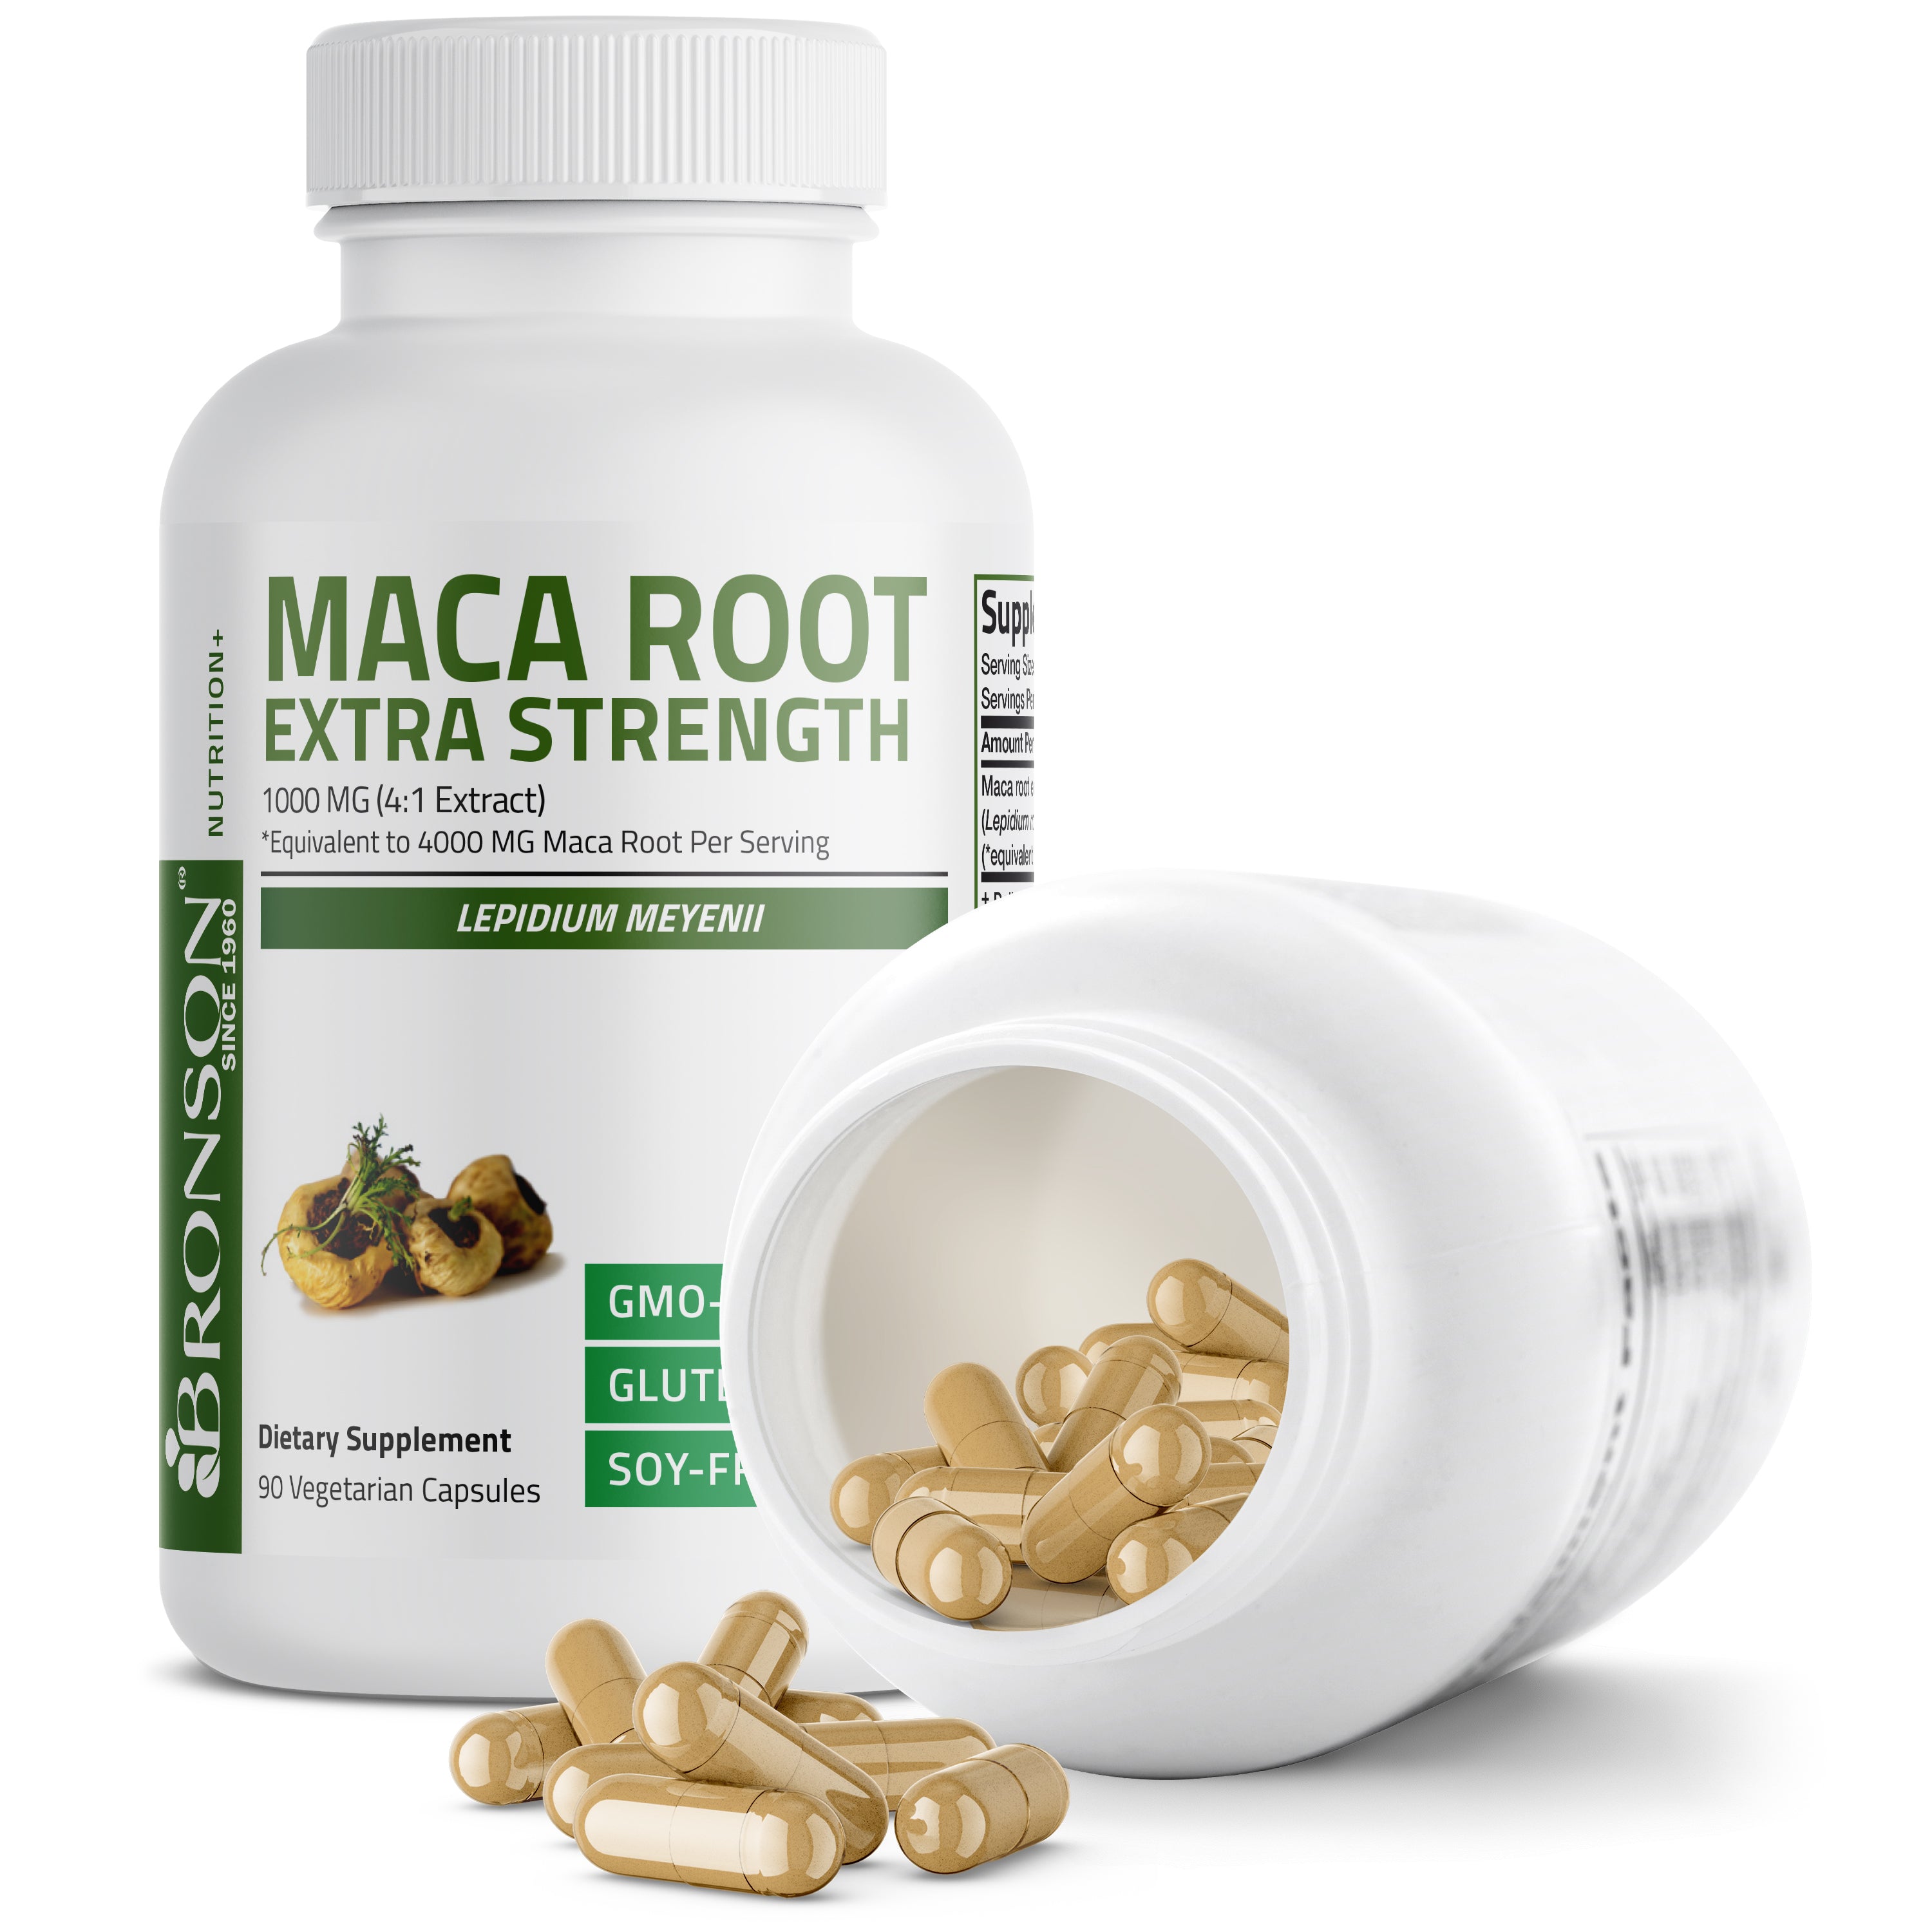 Maca Root Extra Strength 4000 MG per Serving view 10 of 6